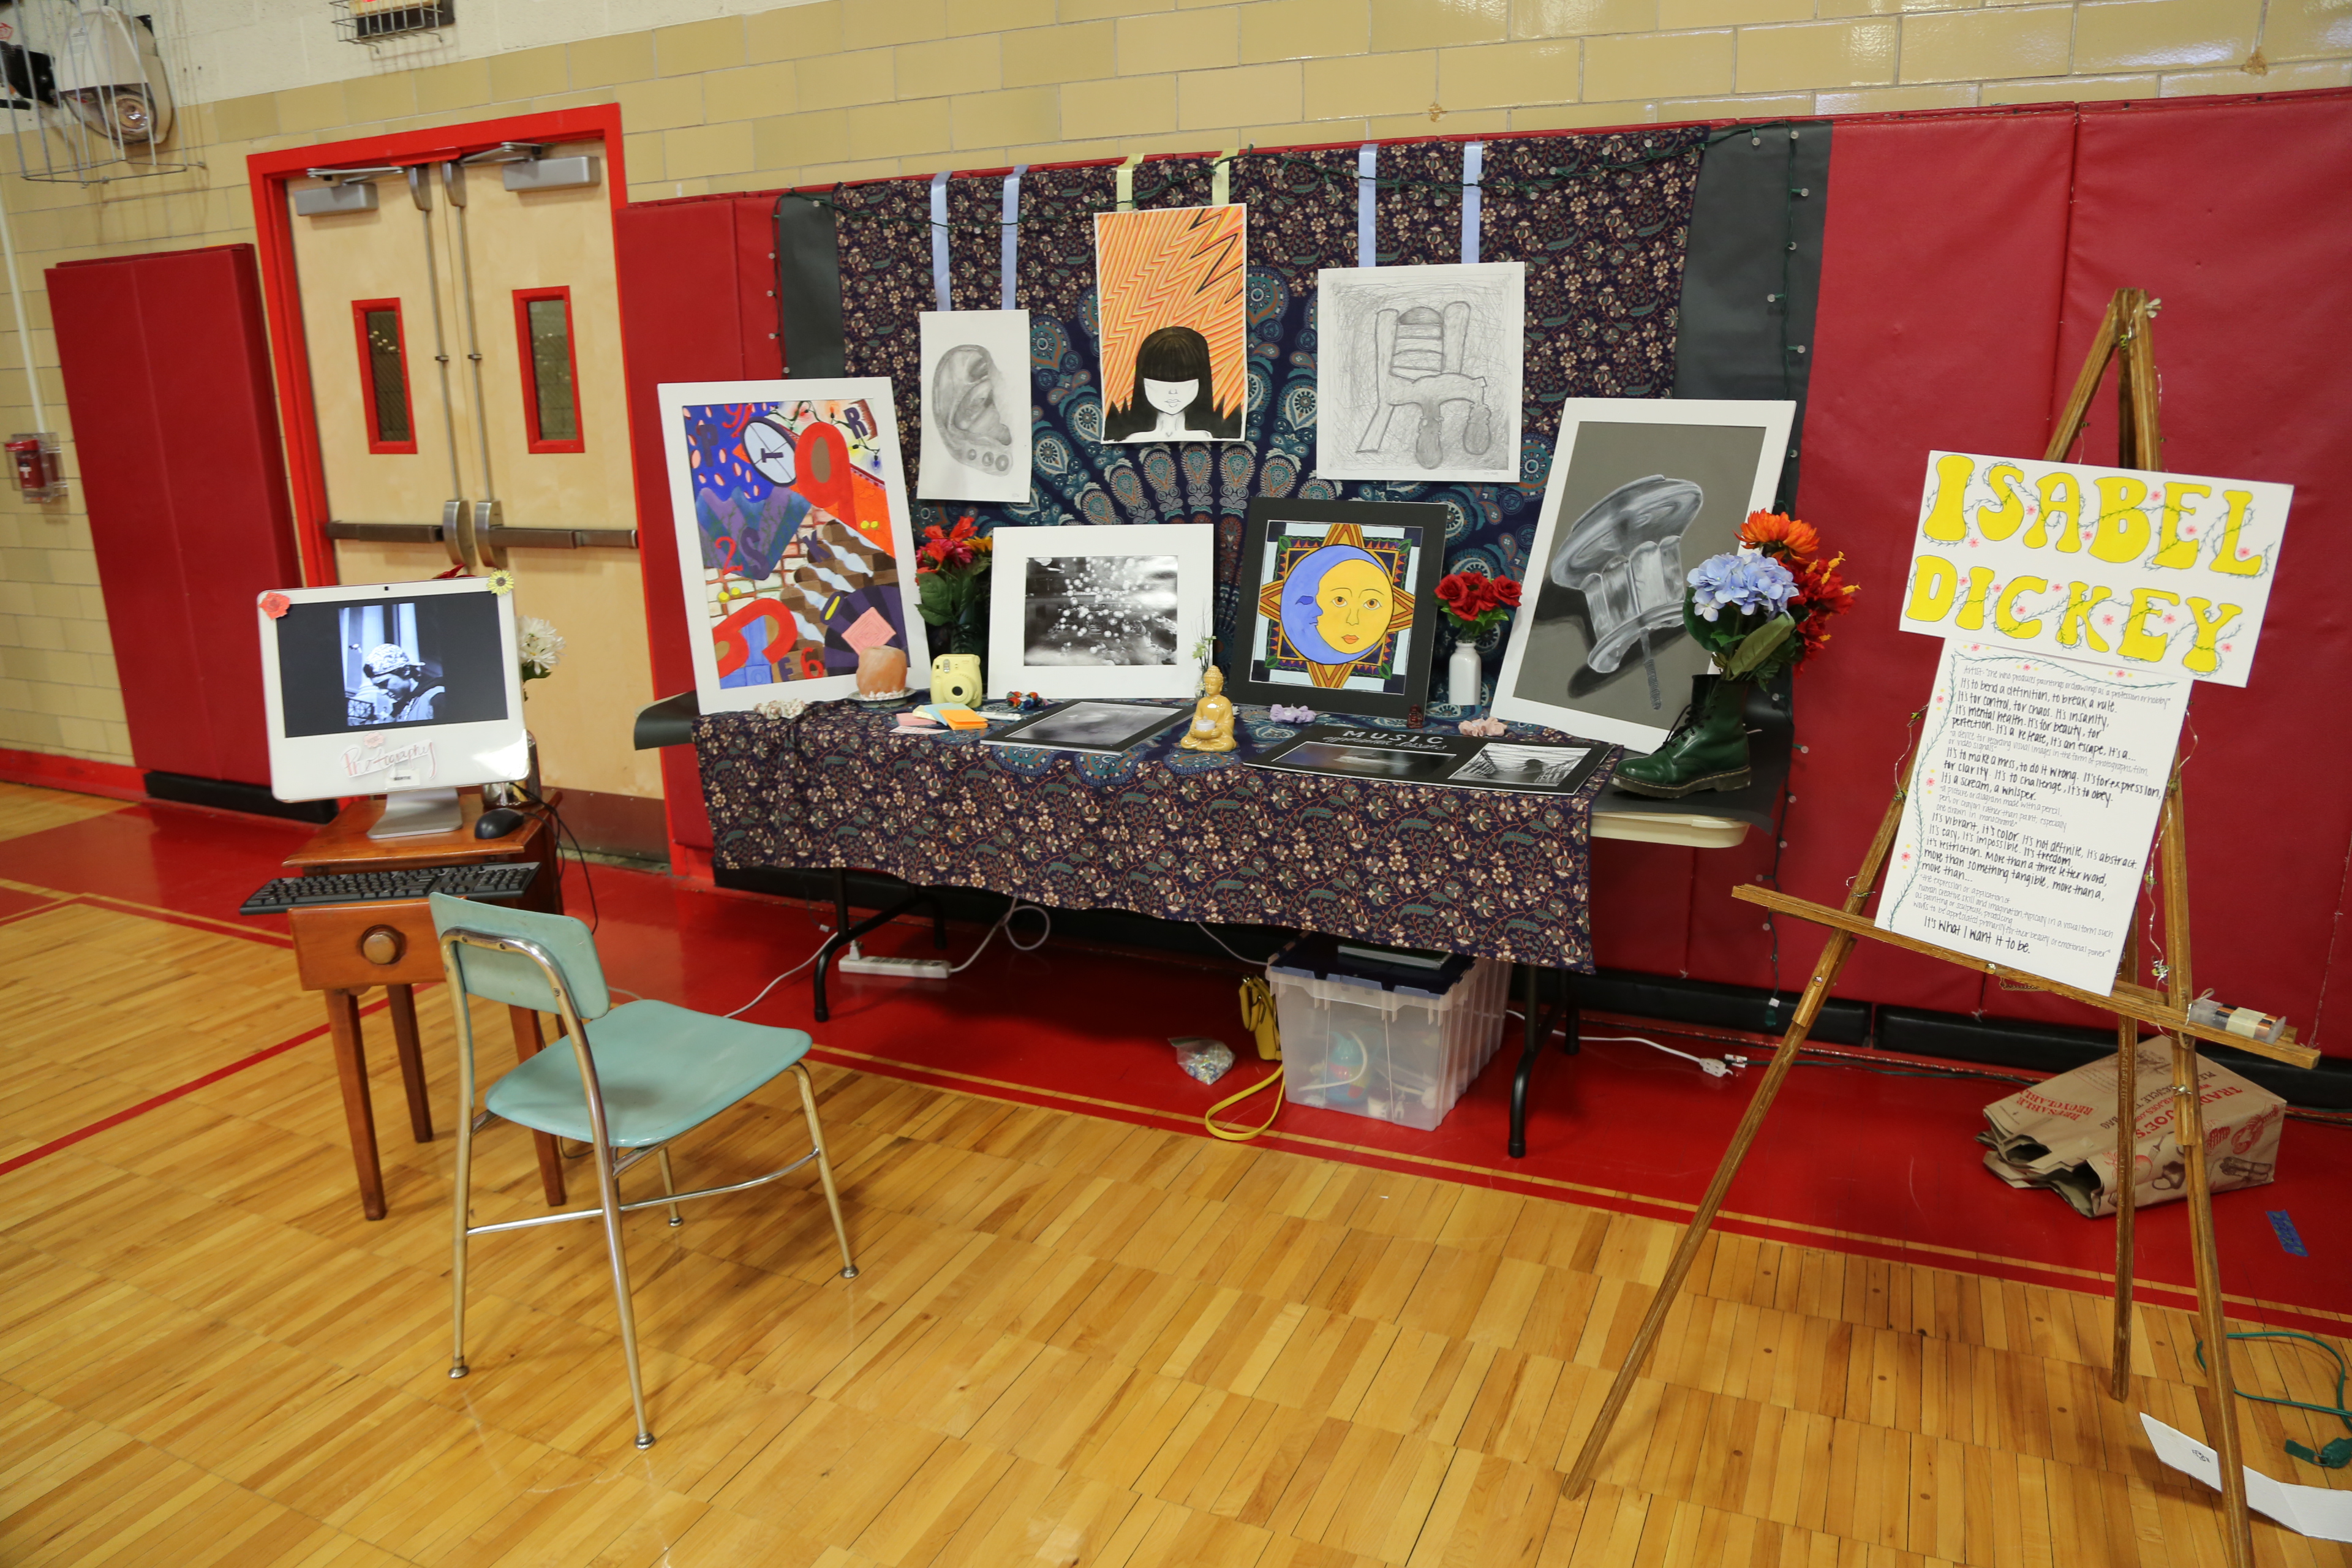 student artwork and paintings on display on a table in a gymnasium